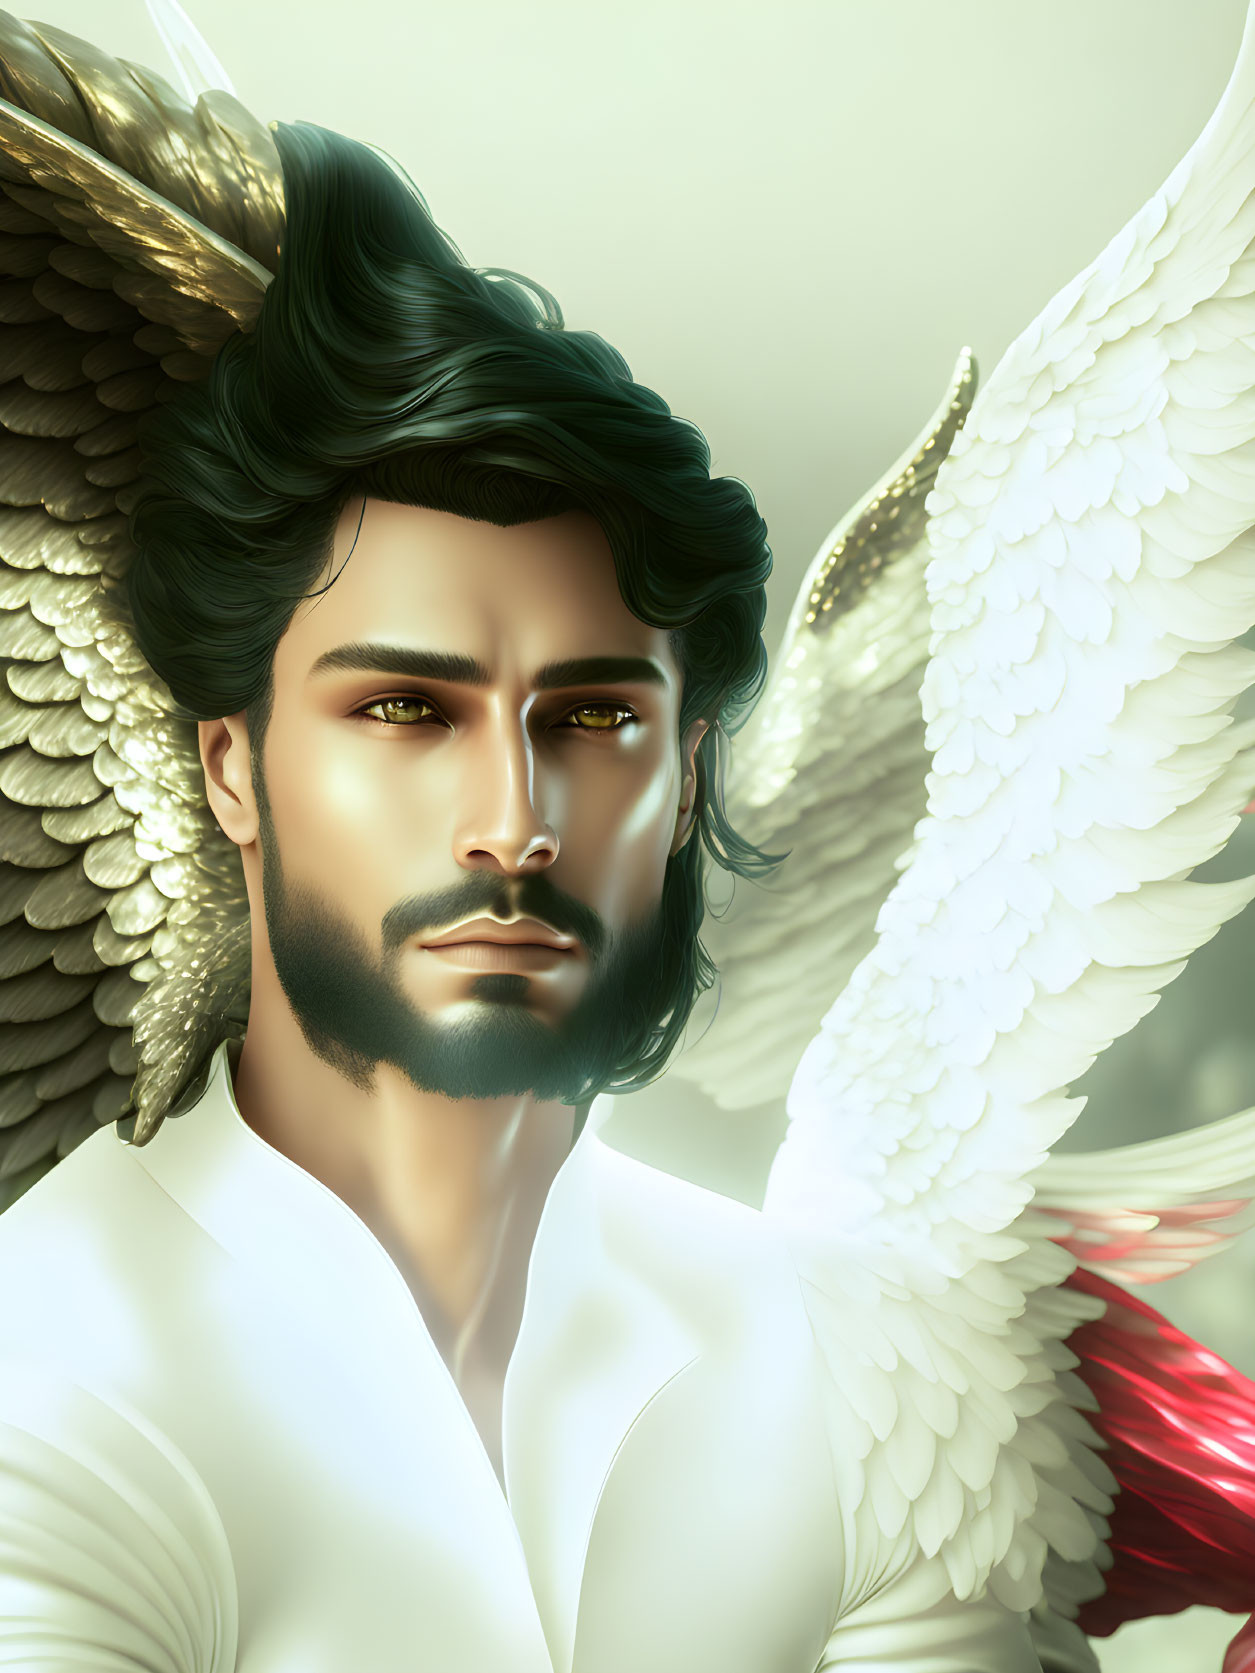 Male figure with angelic wings in white shirt and captivating gaze